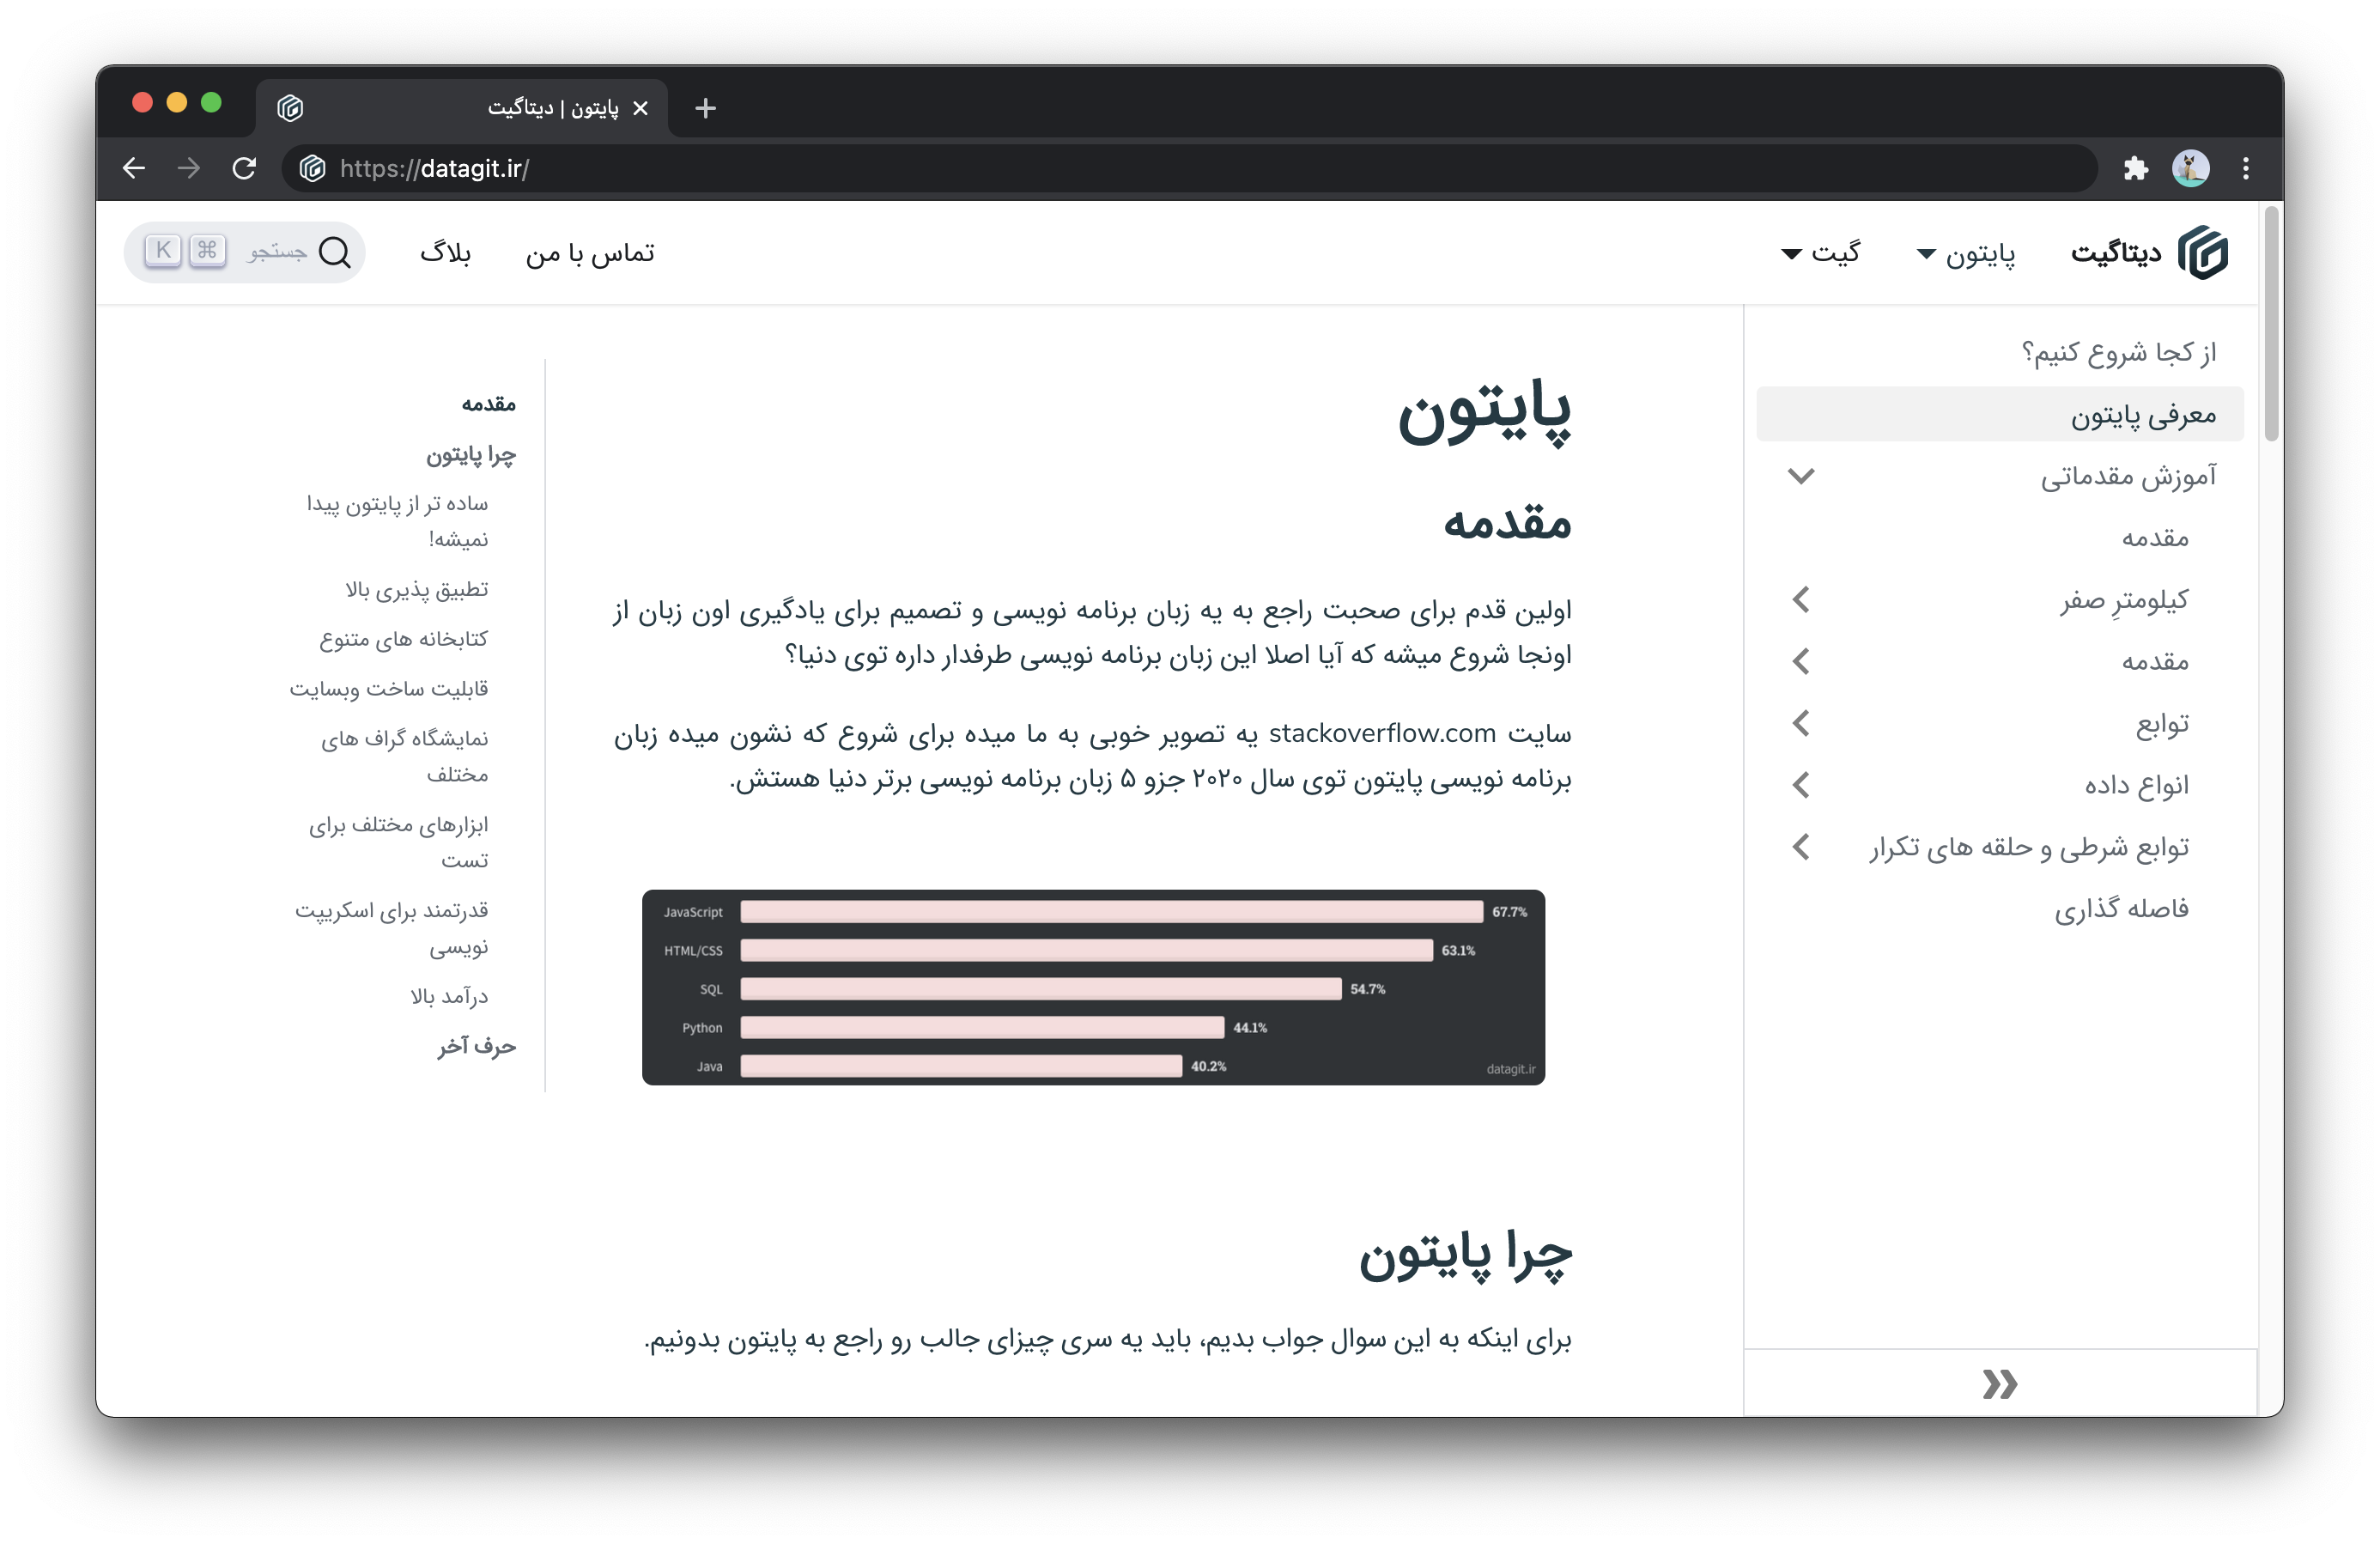 Datagit&#39;s website in Persian, a right-to-left language. The sidebar appears on the right of the window and the TOC appears on the left.